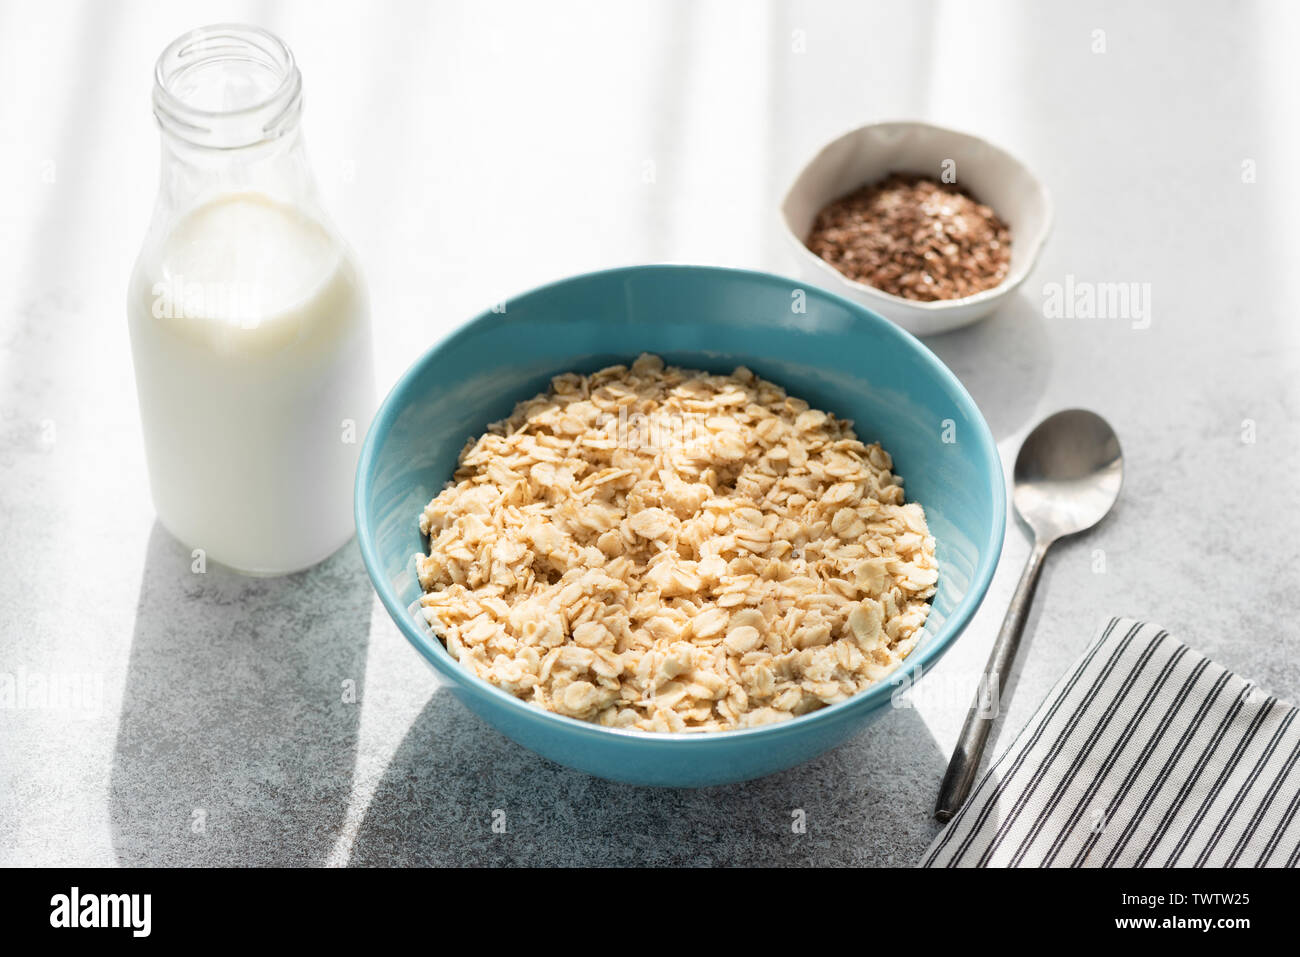 Healthy Breakfast, oatmeal porridge in bowl and bottle of milk. Weight loss, Clean eating concept Stock Photo